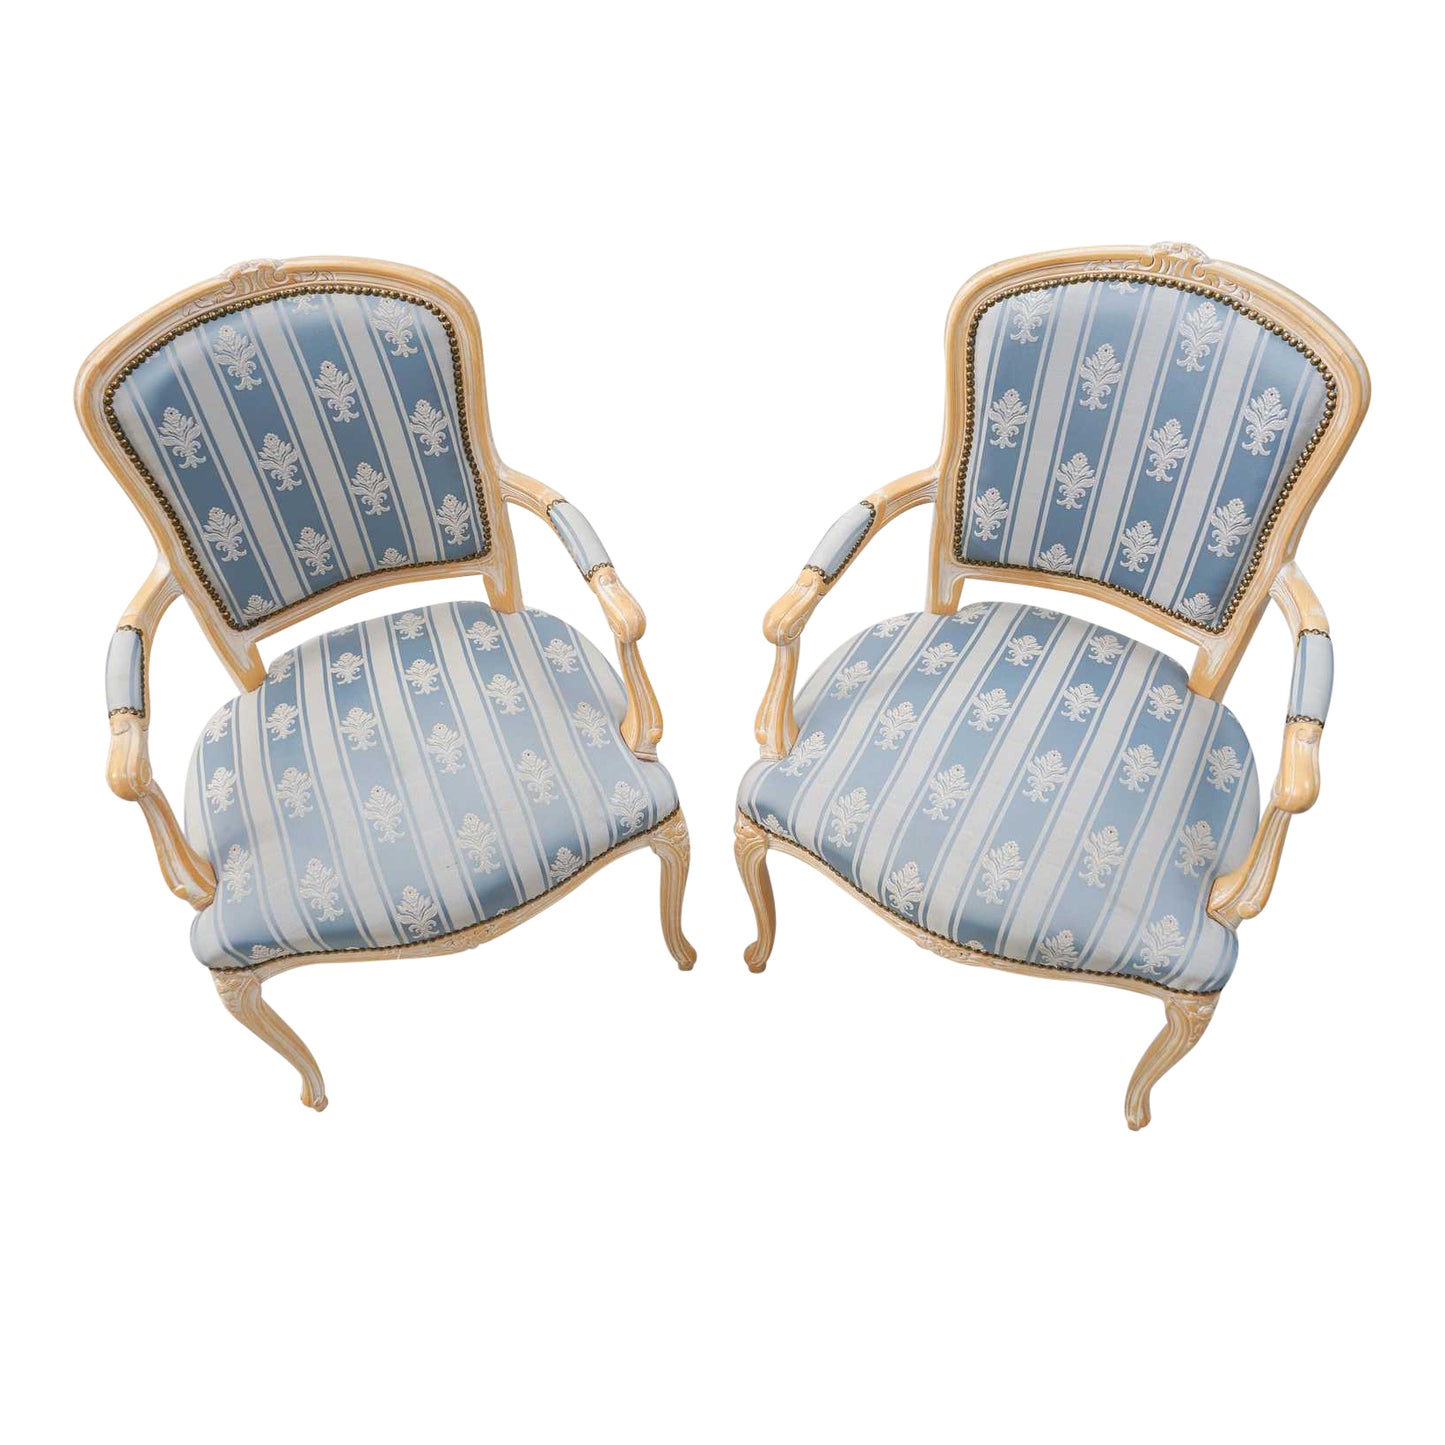 1950s Vintage Rococo Armchairs- A Pair